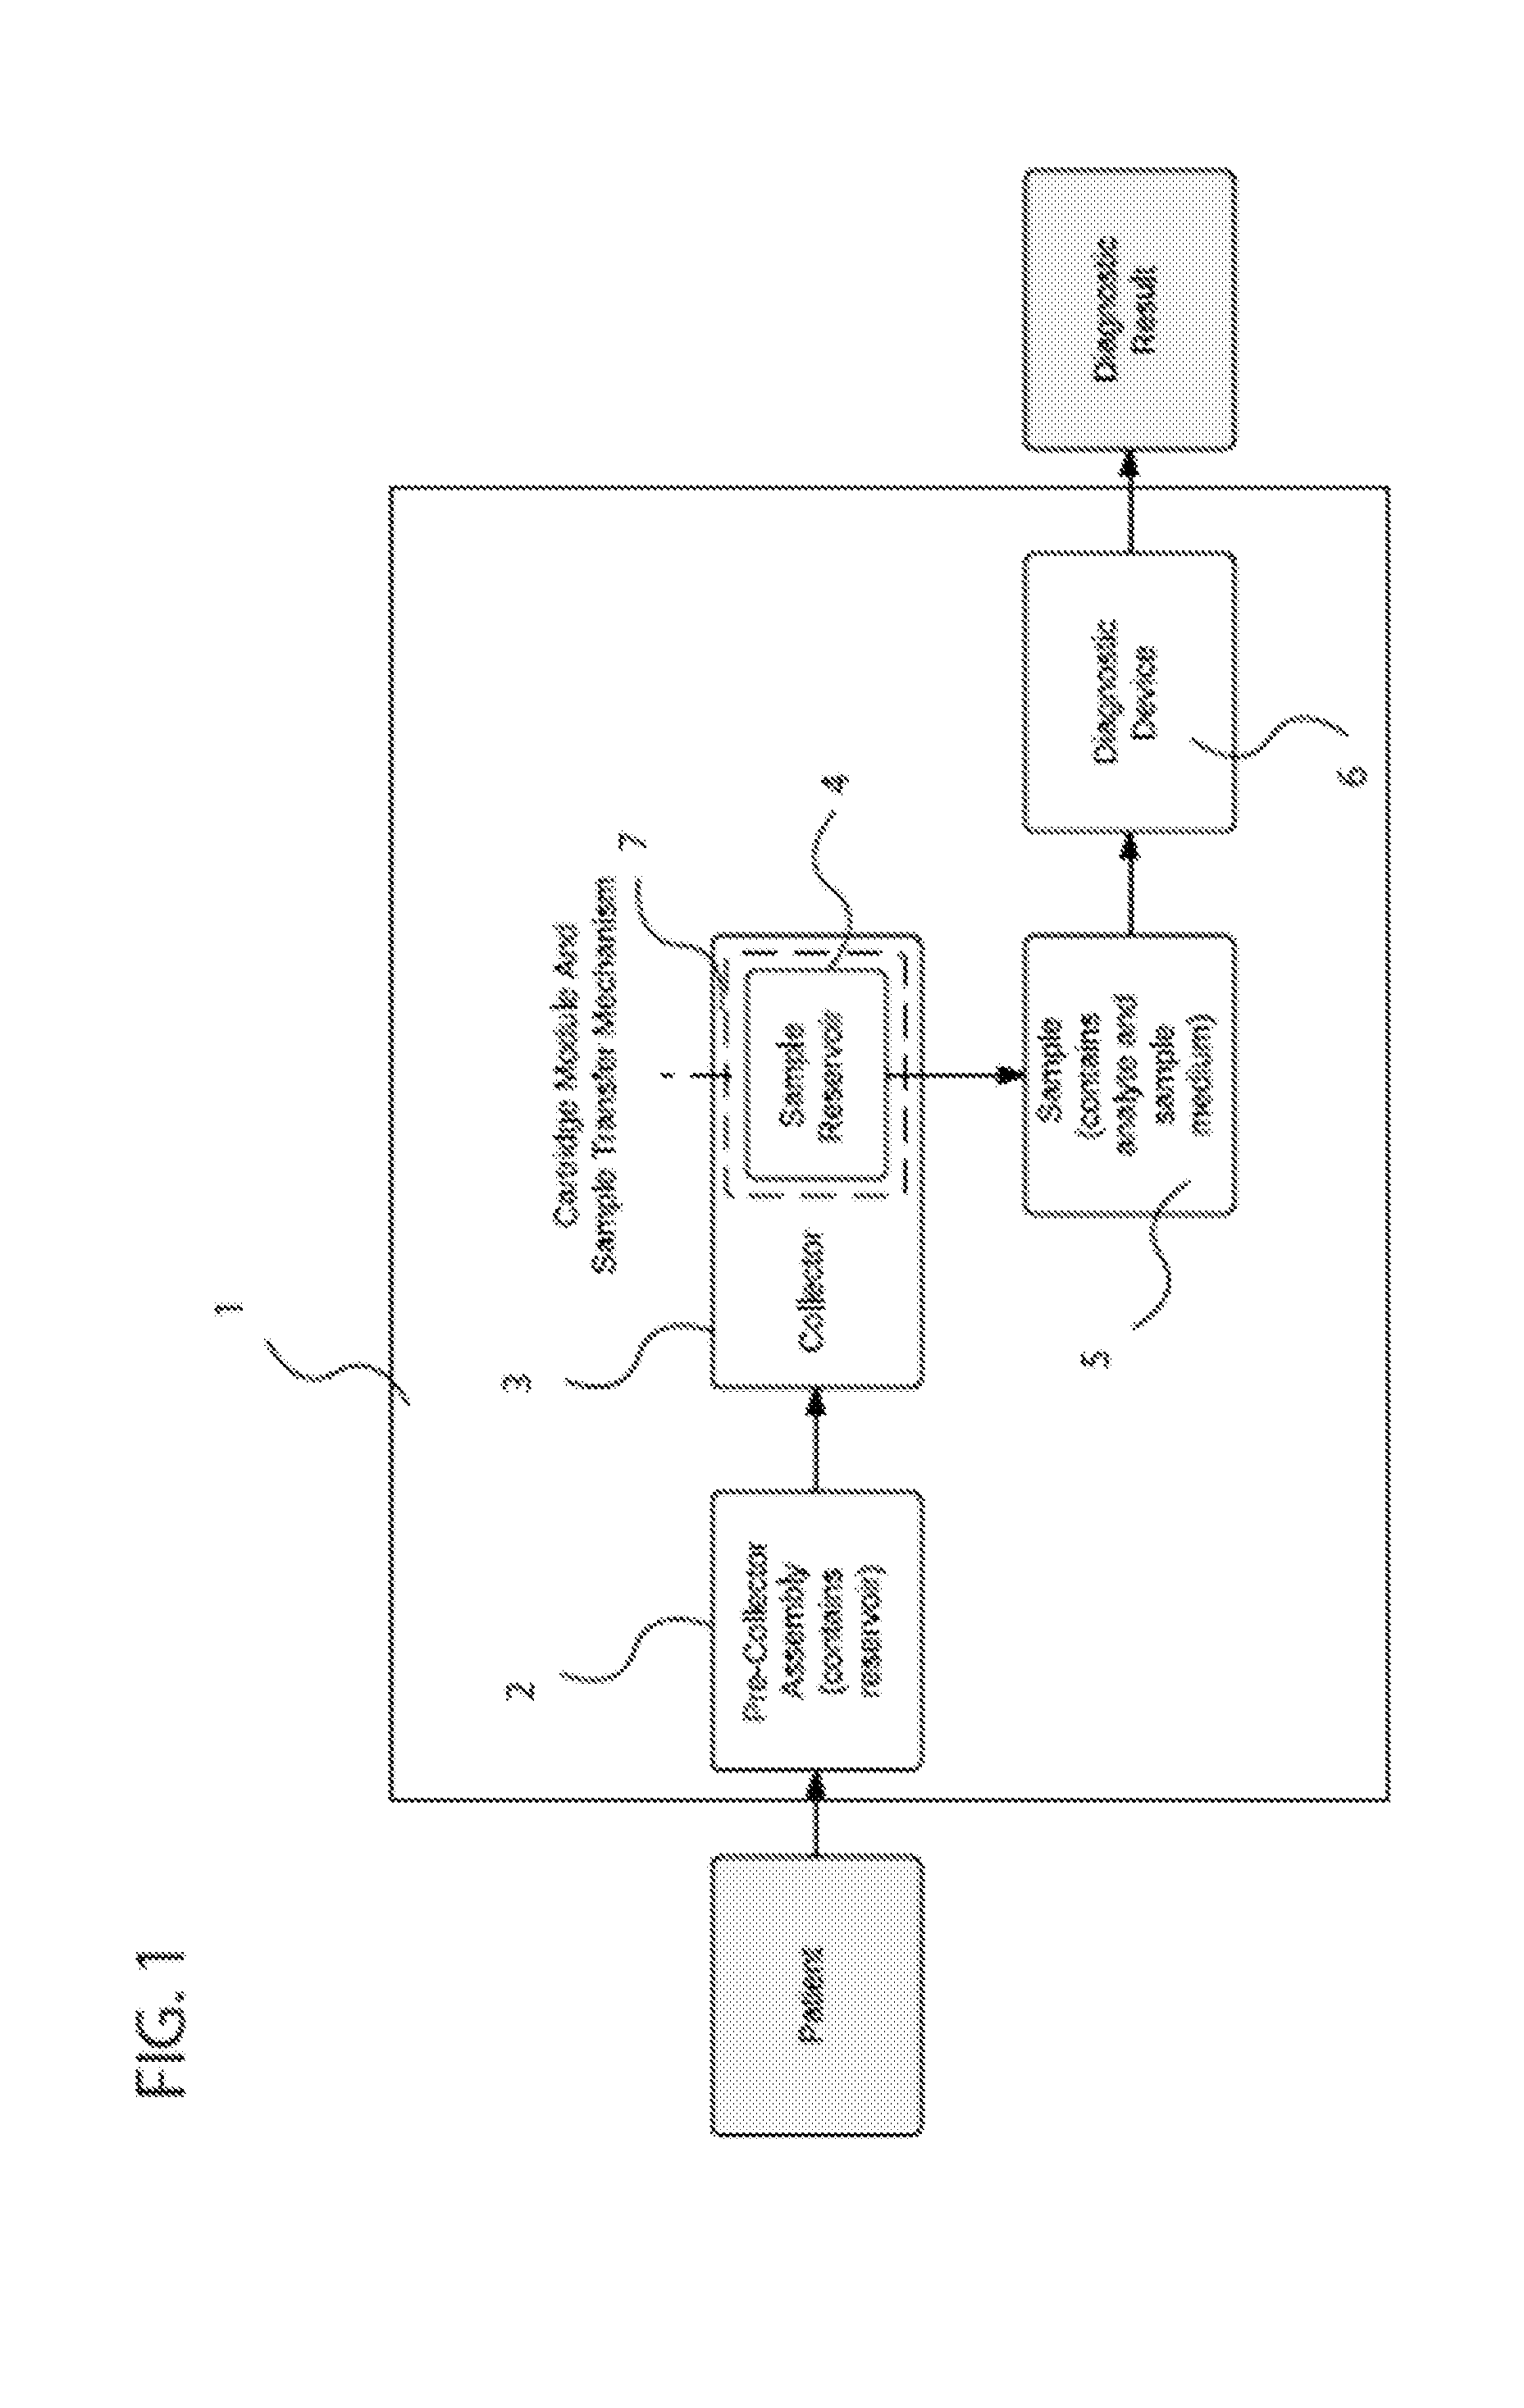 System for breath sample collection and analysis